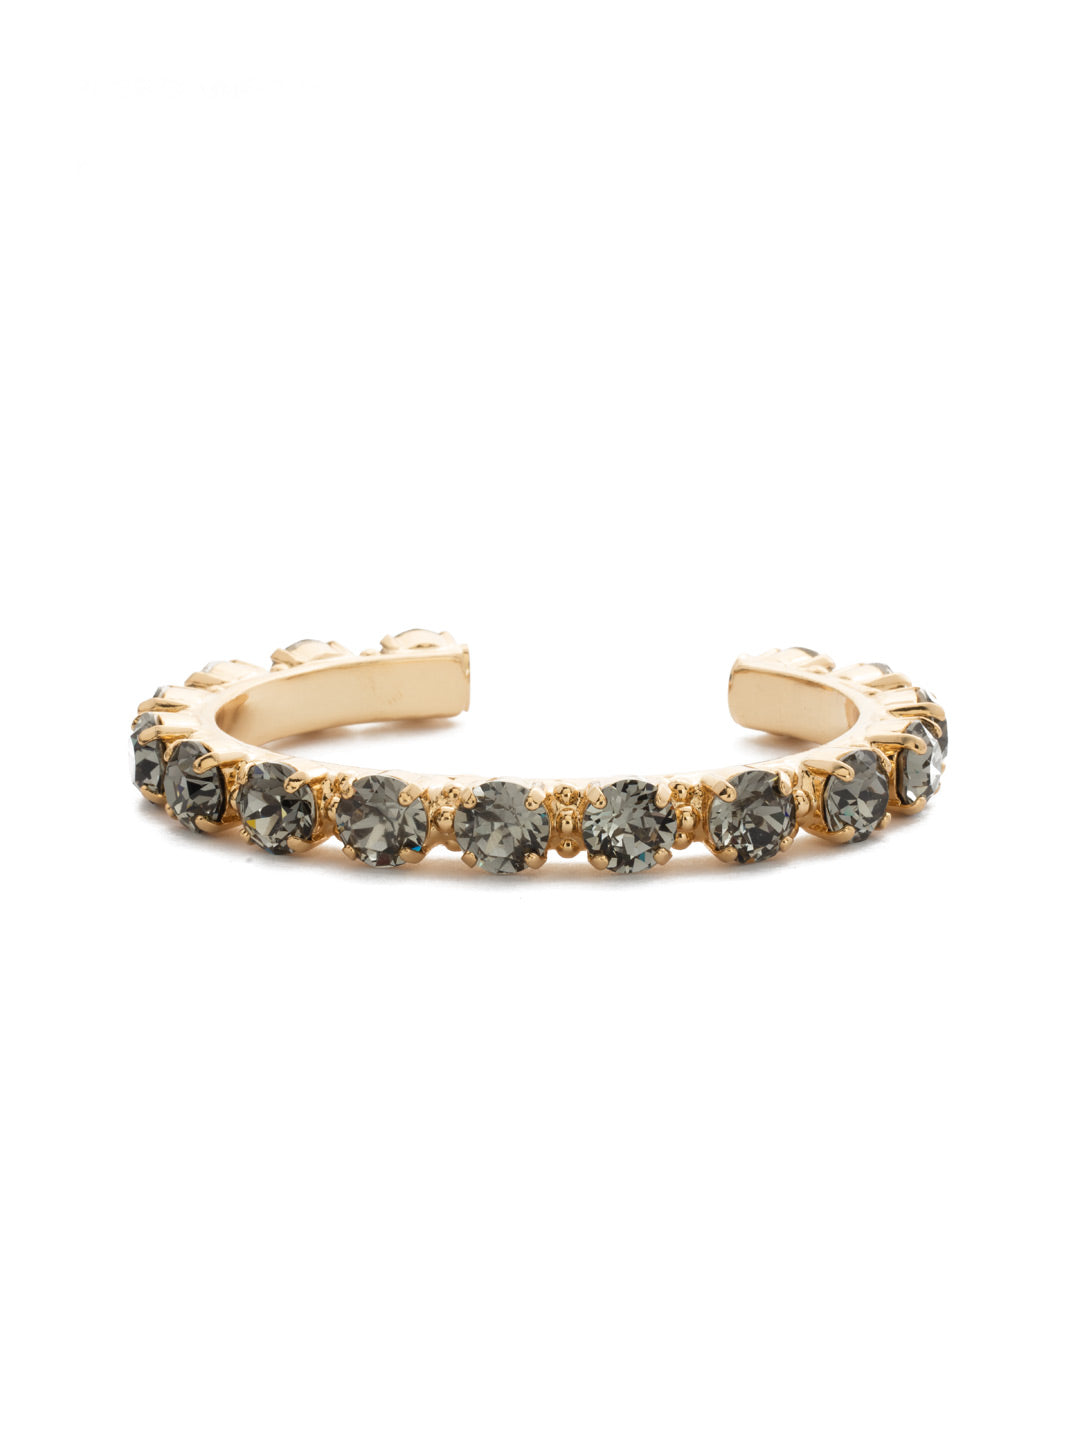 Riveting Romance Cuff Bracelet - BCL23BGBD - <p>Truly antique-inspired, this piece can be mixed and matched in so many ways. Wear it with a vintage inspired outfit, or add a twist to a modern trend. This piece will match with everything! From Sorrelli's Black Diamond collection in our Bright Gold-tone finish.</p>